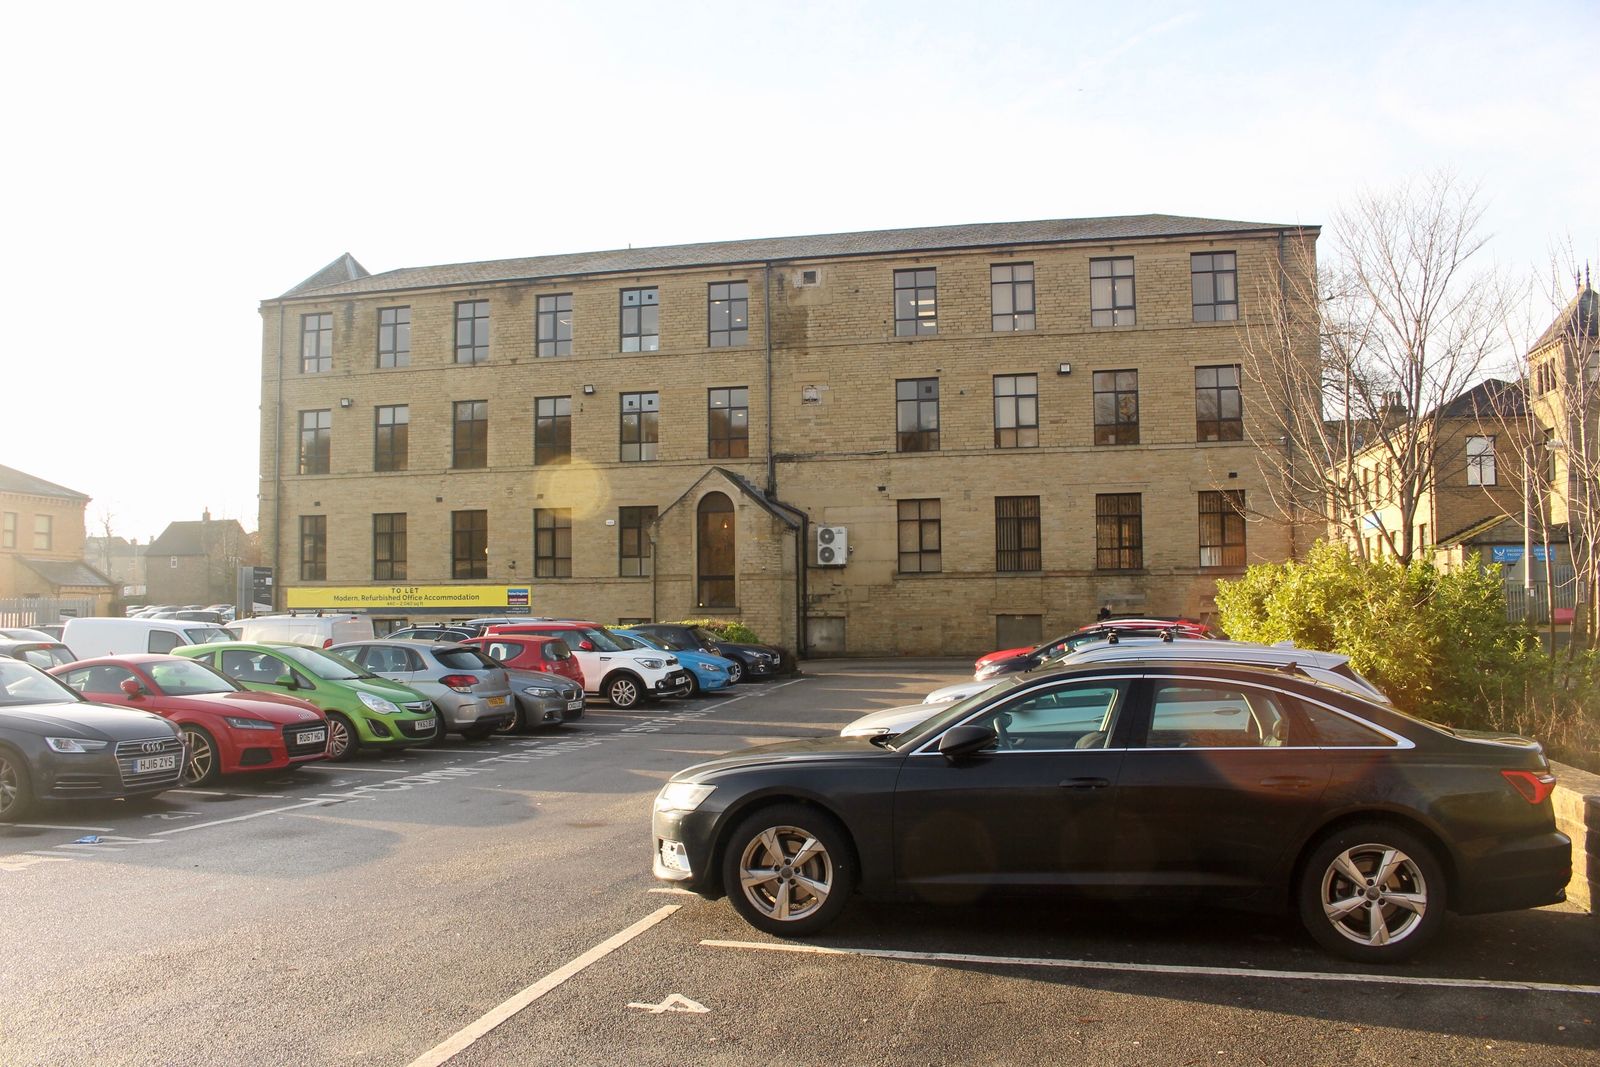 NHS medical imagery provider signs two-year lease on duo of Brighouse offices